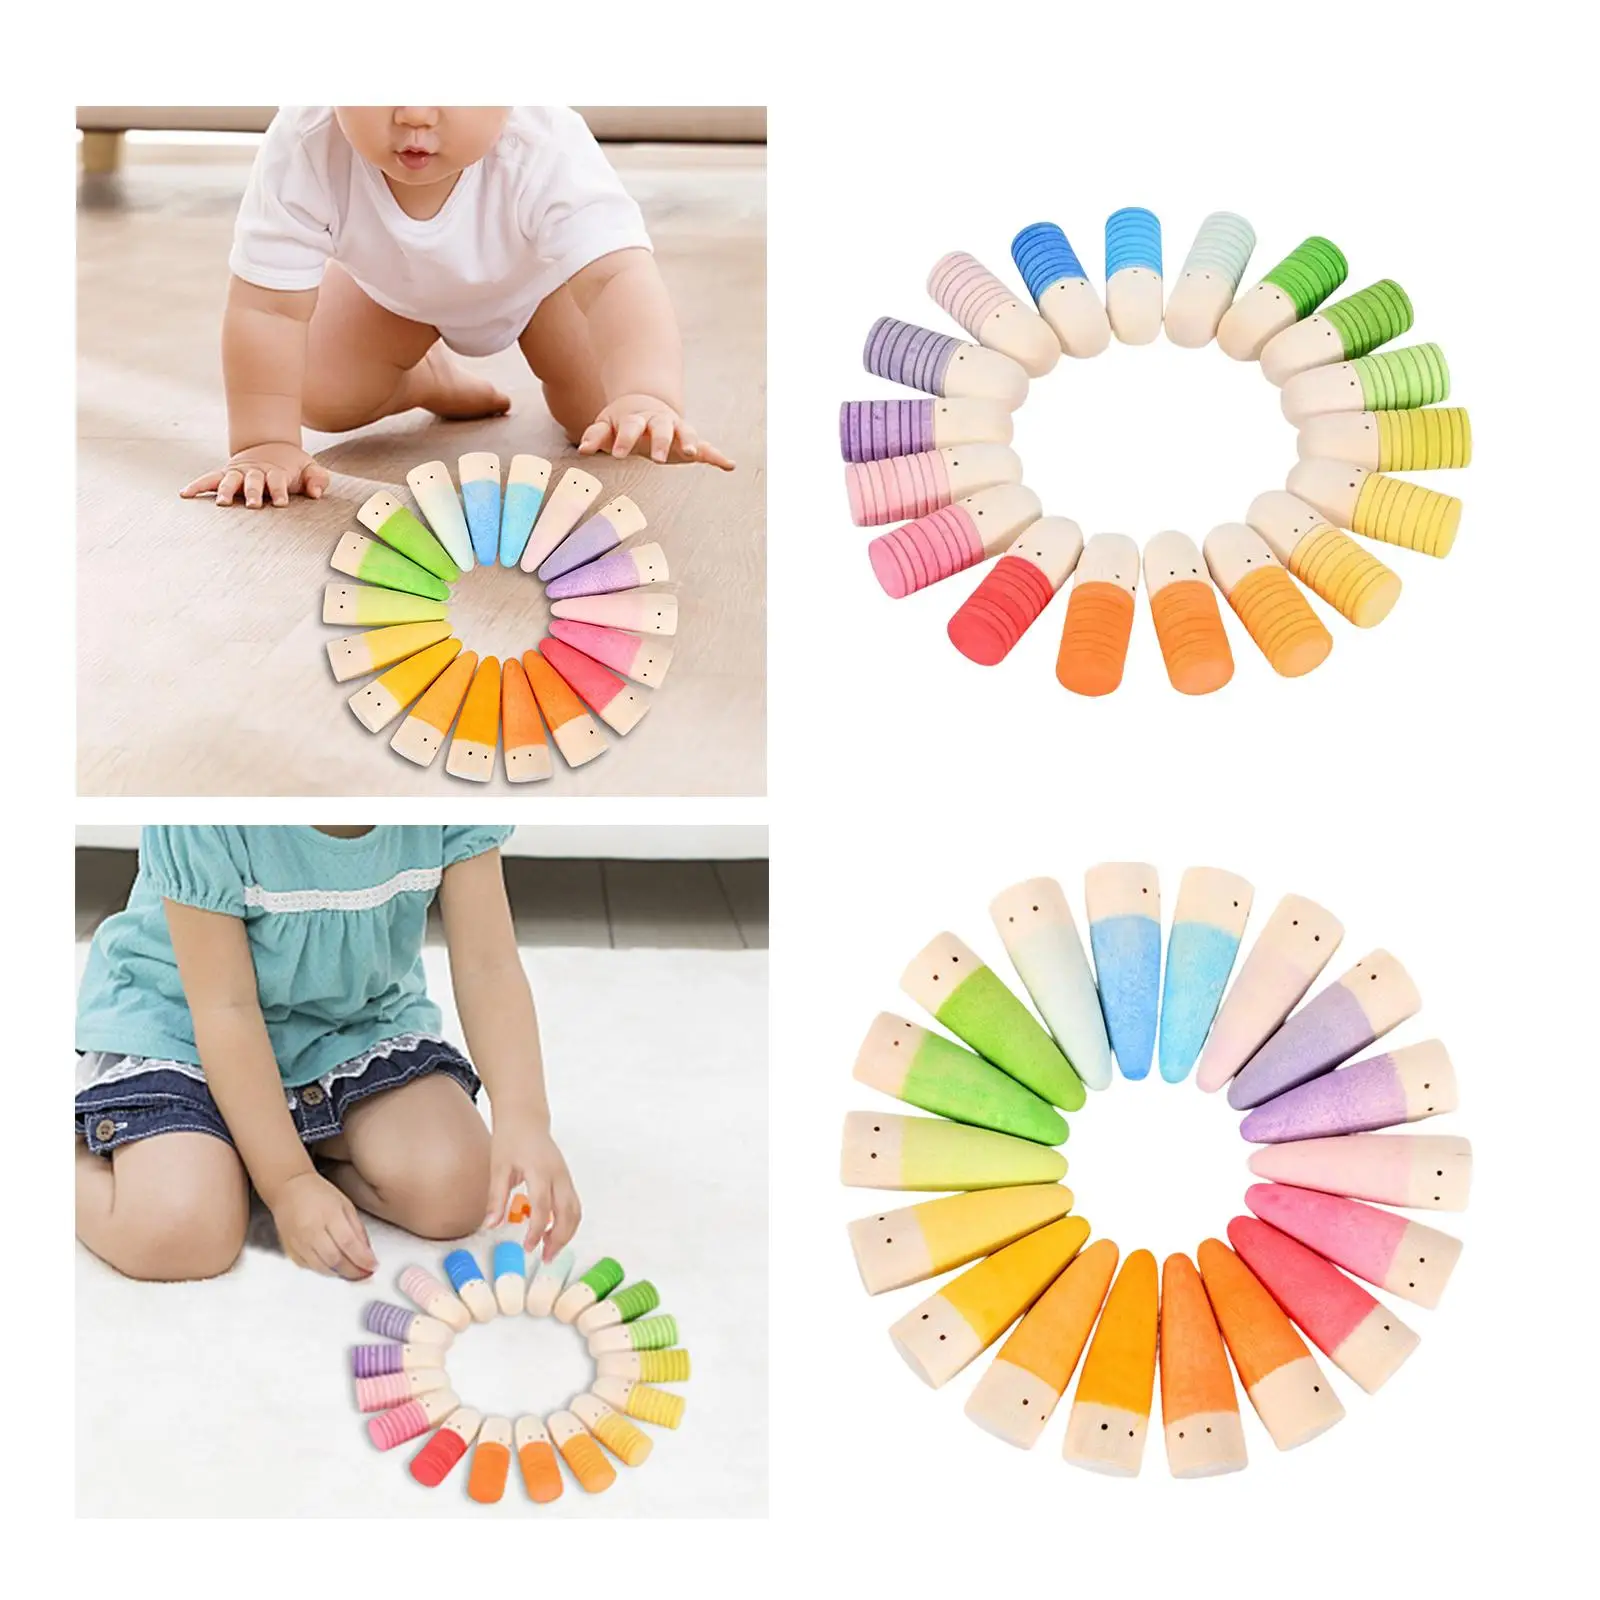 18x Rainbow Peg Dolls for Toddlers Hand Eye Coordination for Children